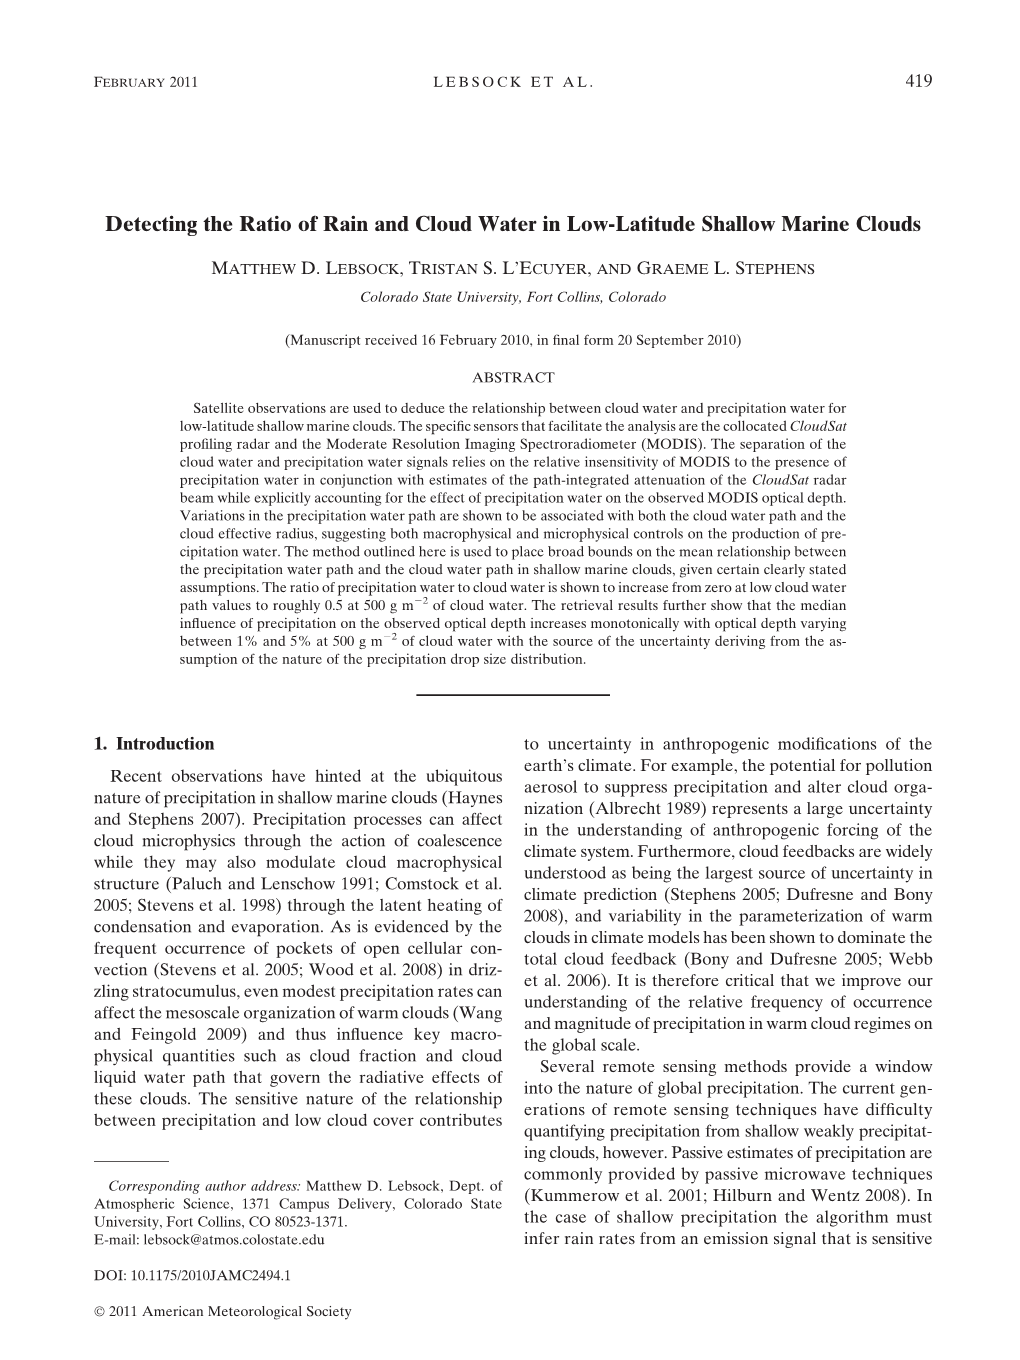 Detecting the Ratio of Rain and Cloud Water in Low-Latitude Shallow Marine Clouds